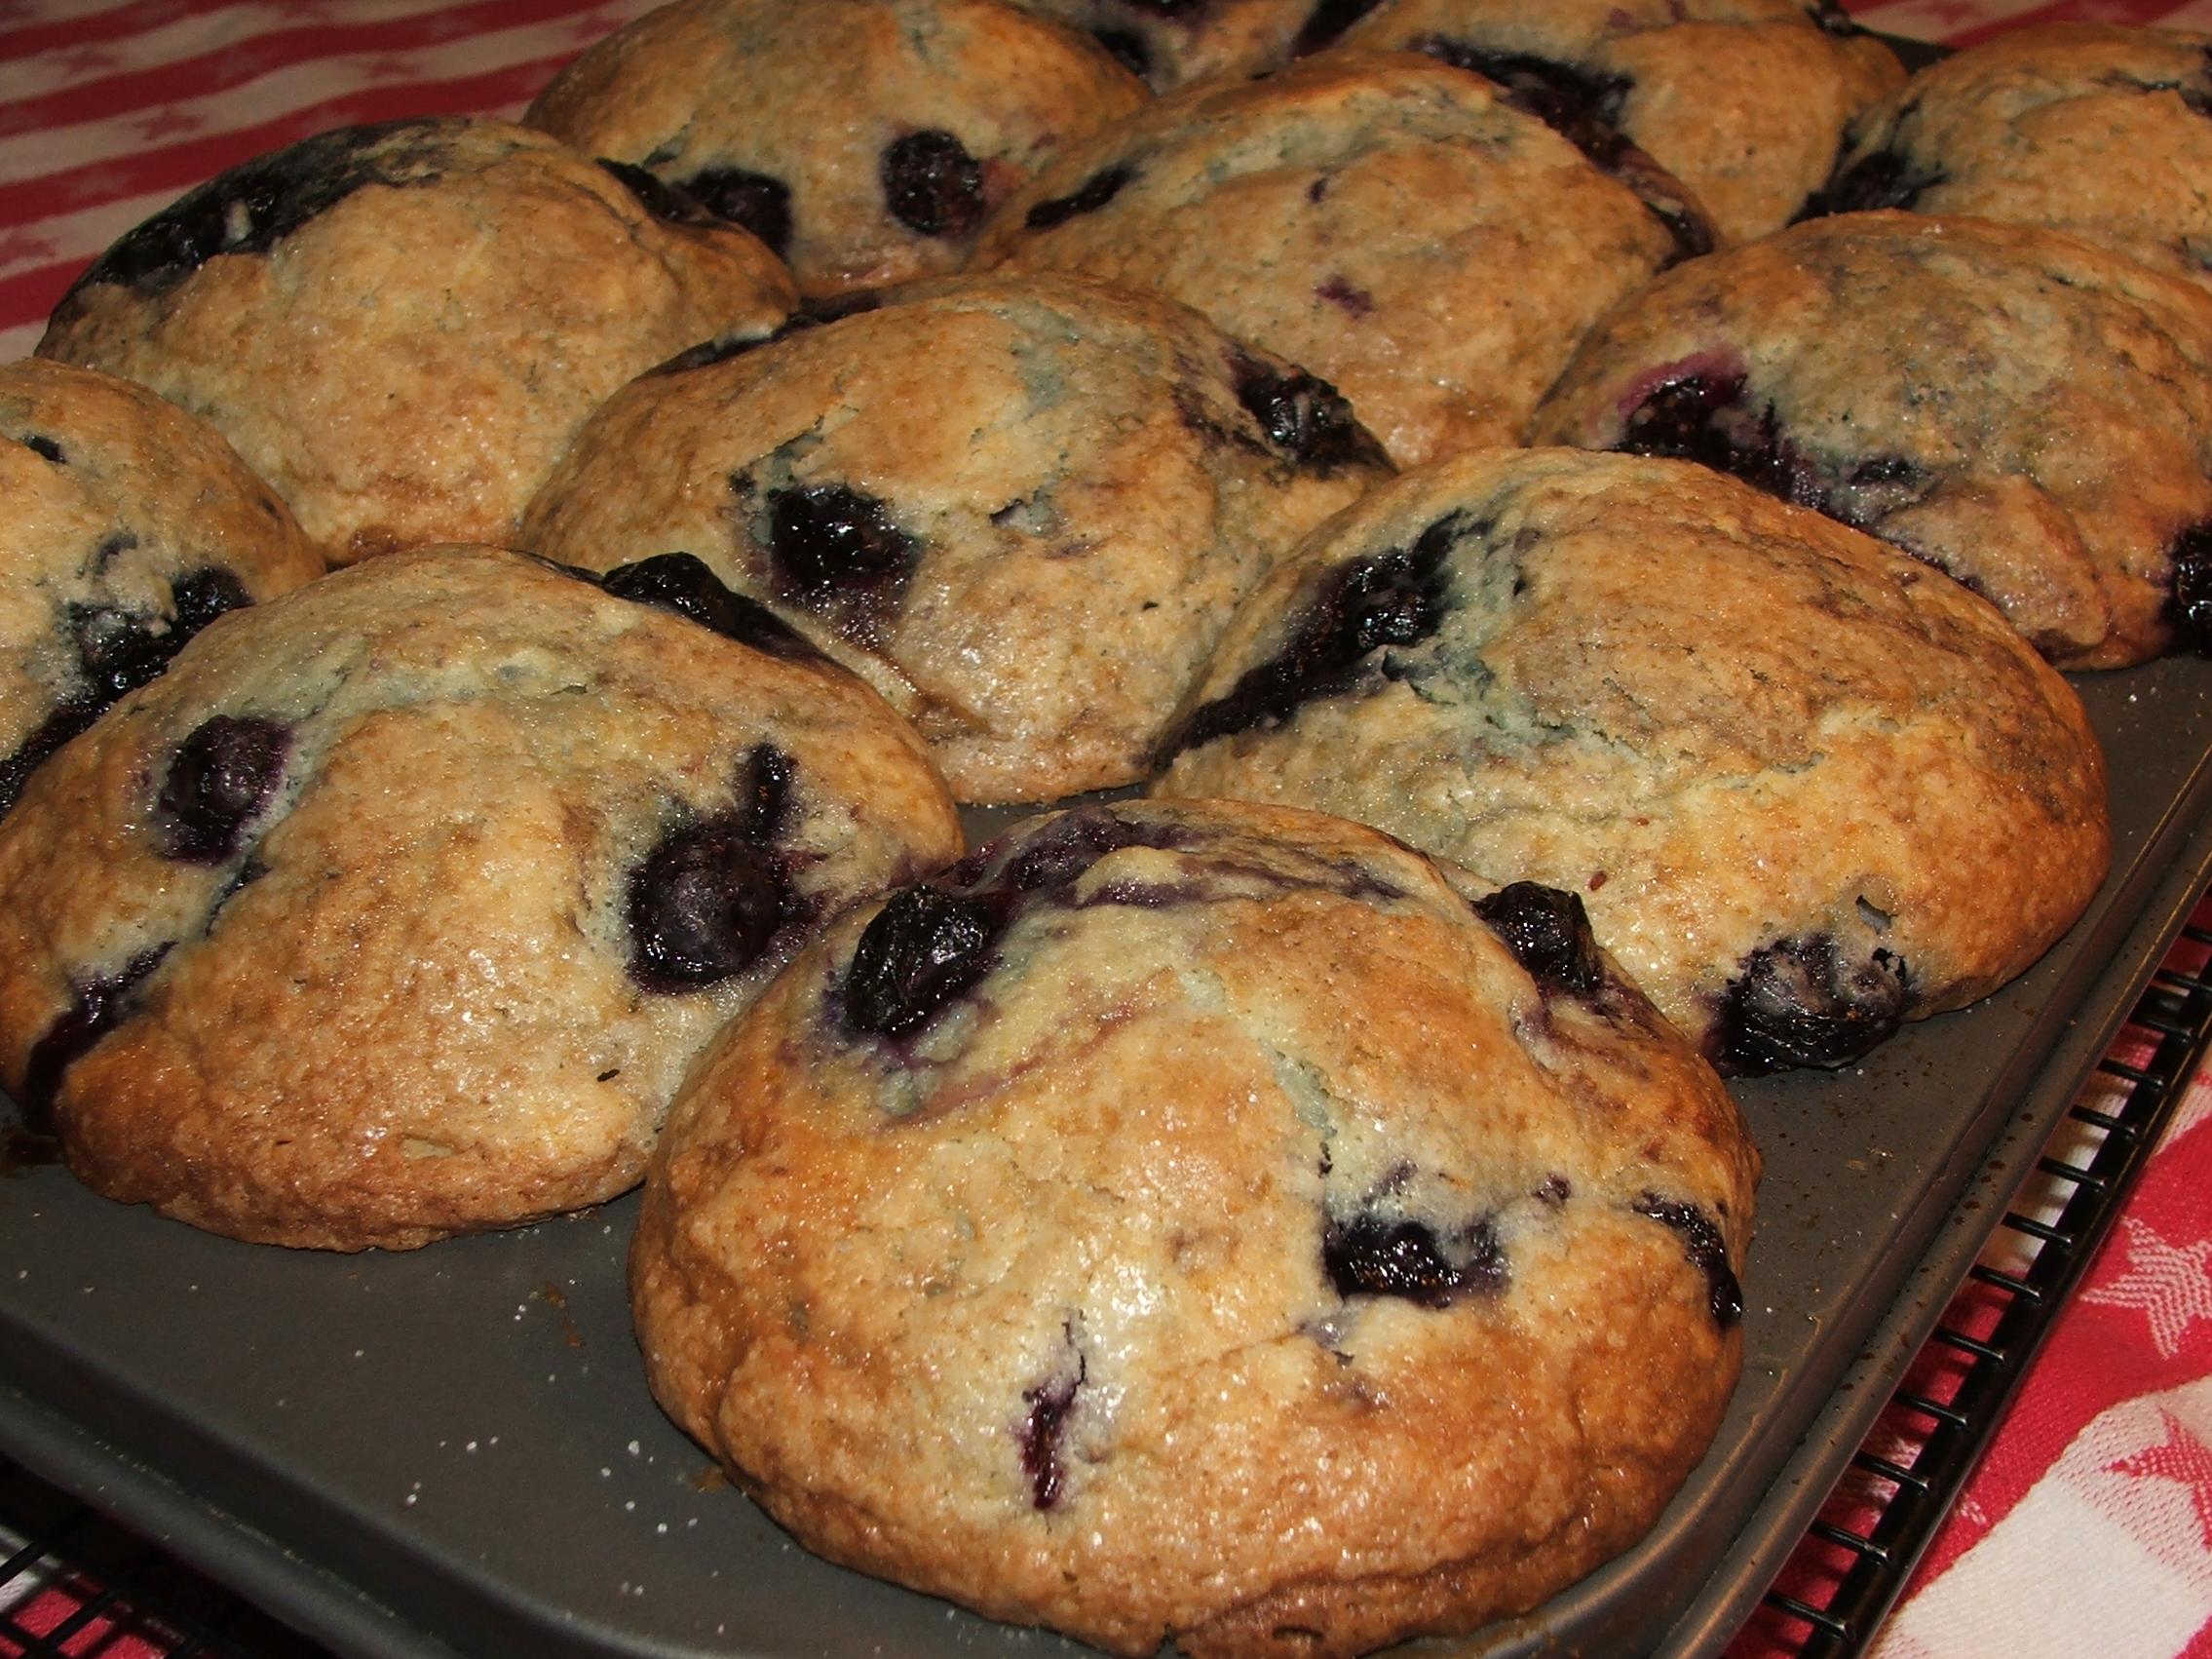  A perfect treat to pair with your morning coffee, try these Blueberry Coffee Cake Muffins.